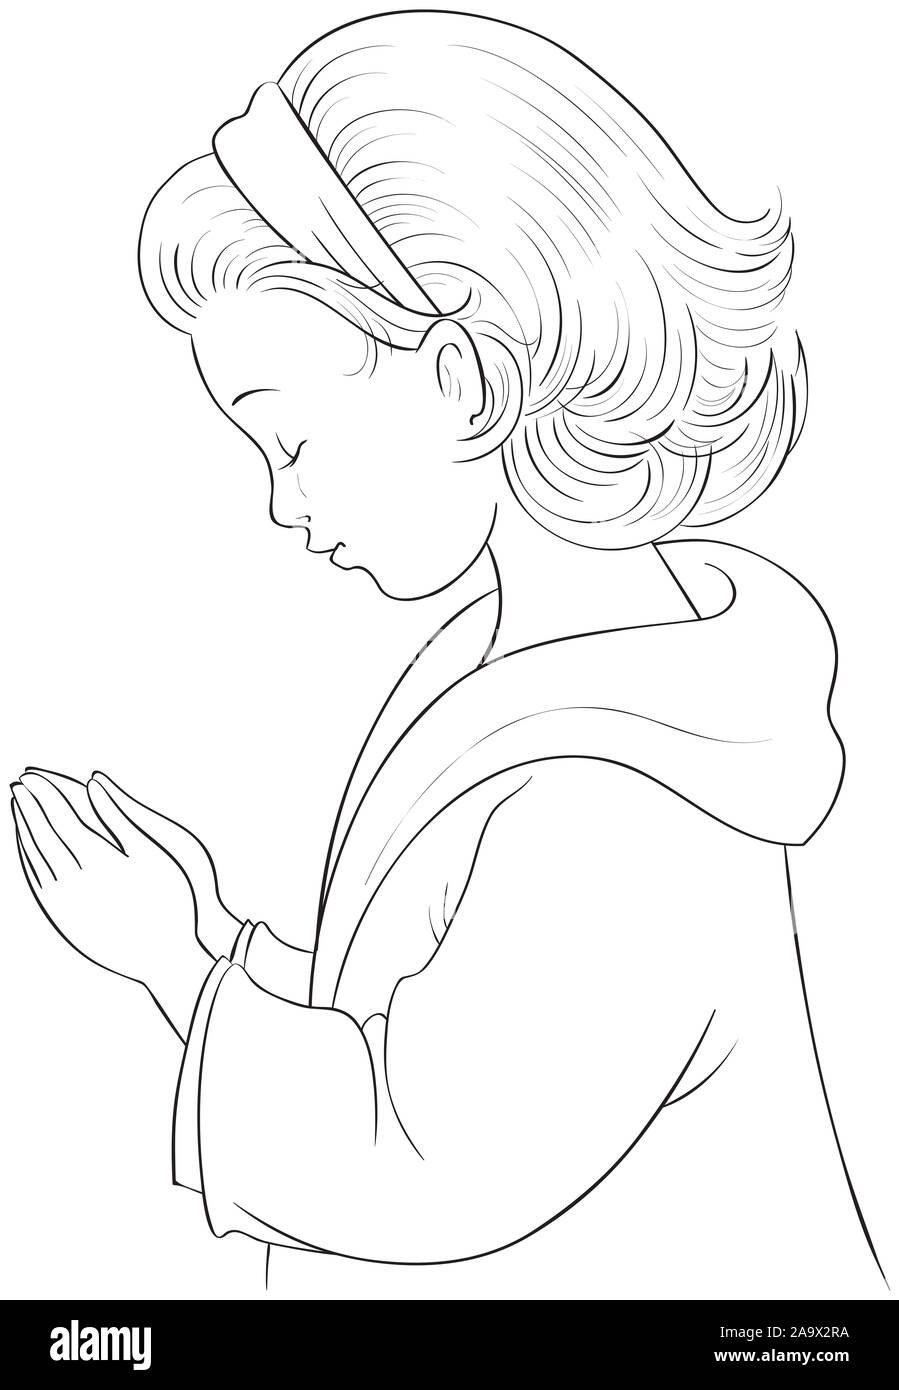 Cute Cartoon Little Girl Praying With Her Hands Folded Coloring